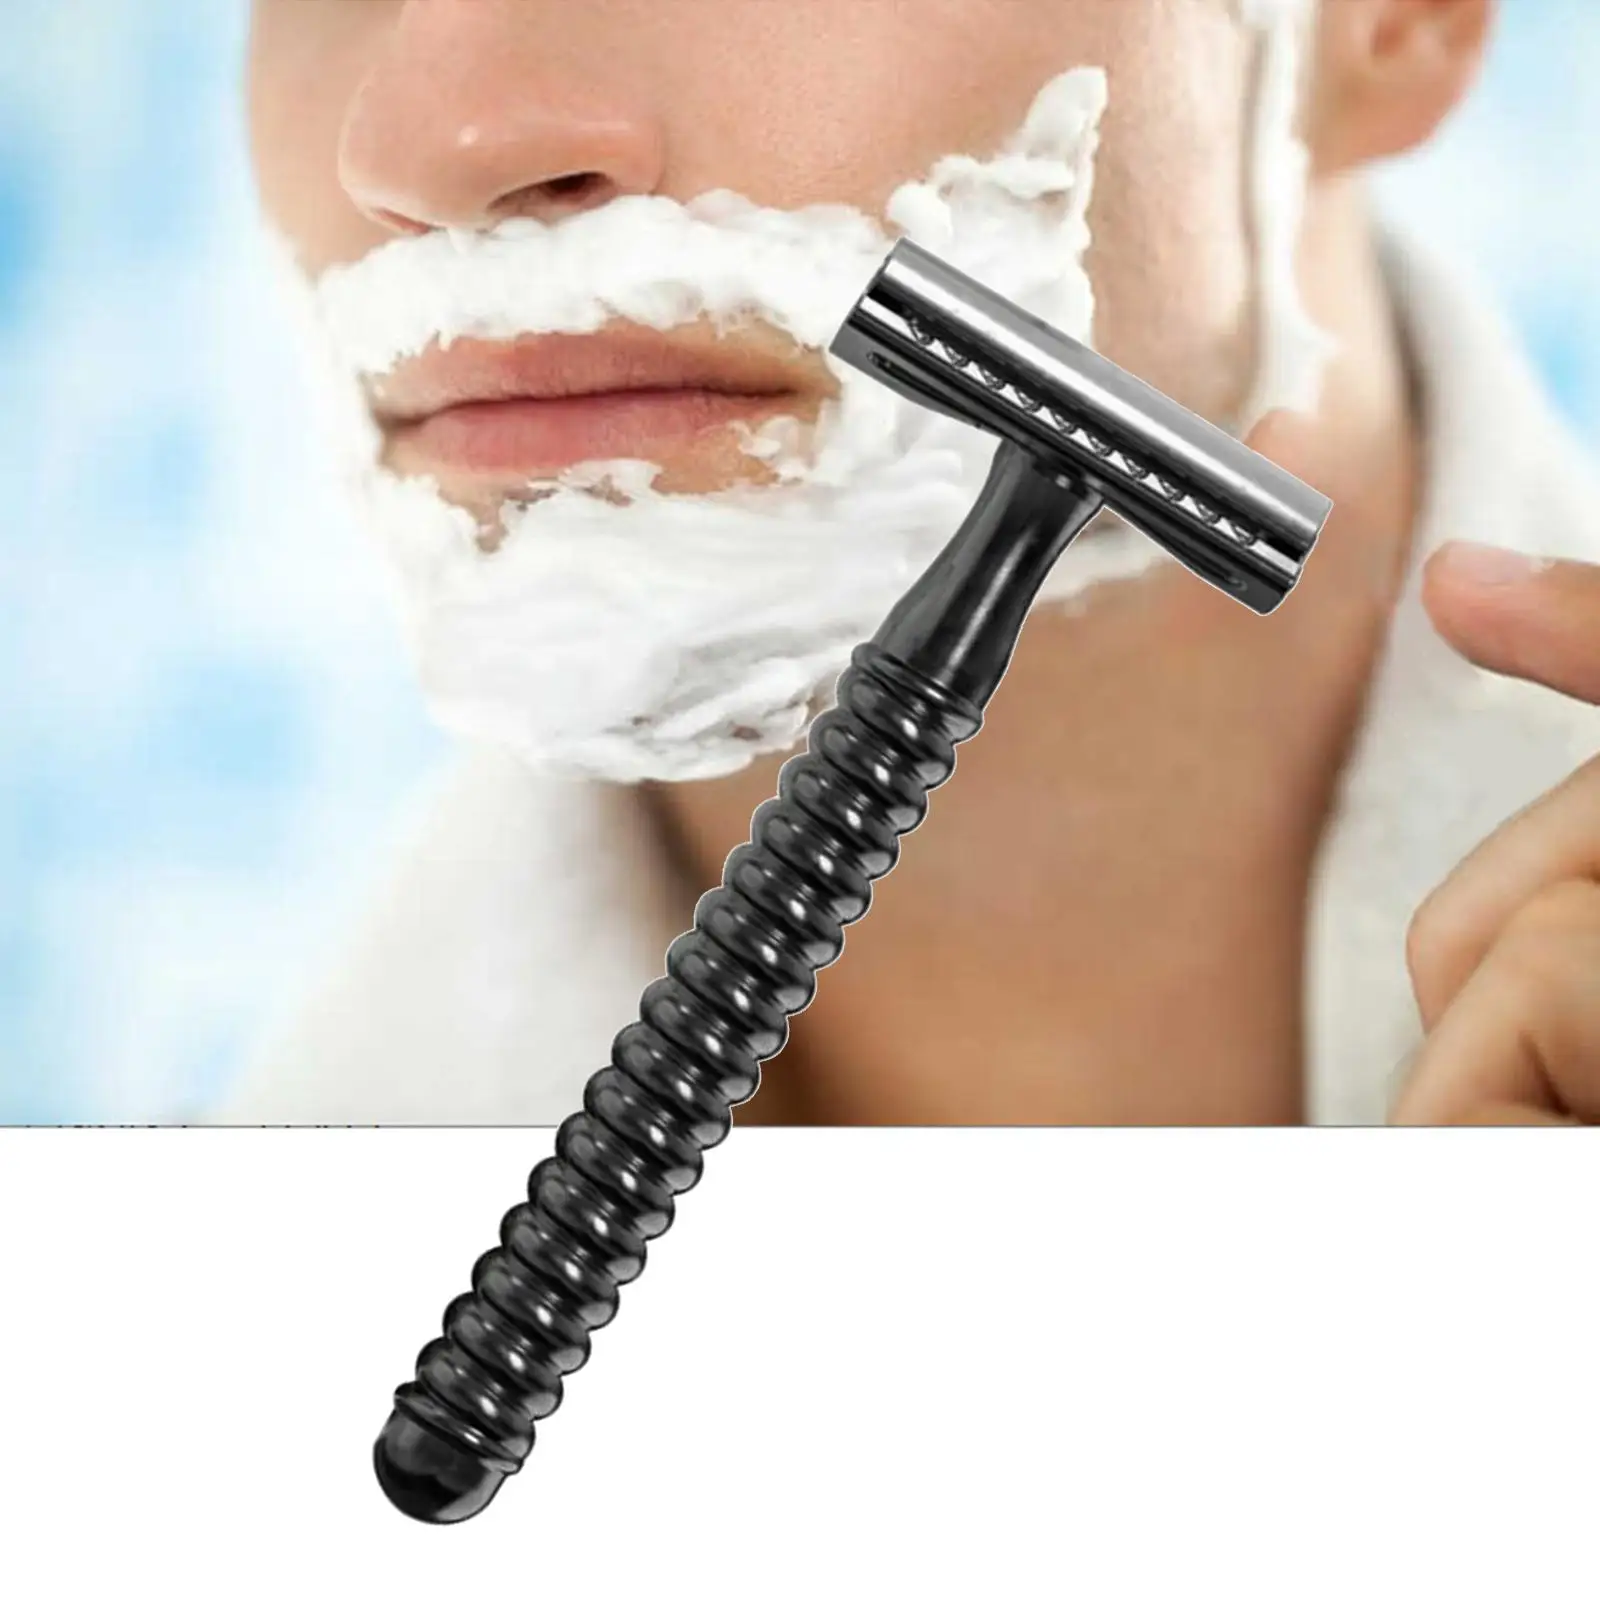 Manuals Blade for Men Close Clean Cost Effective Wet Shaving